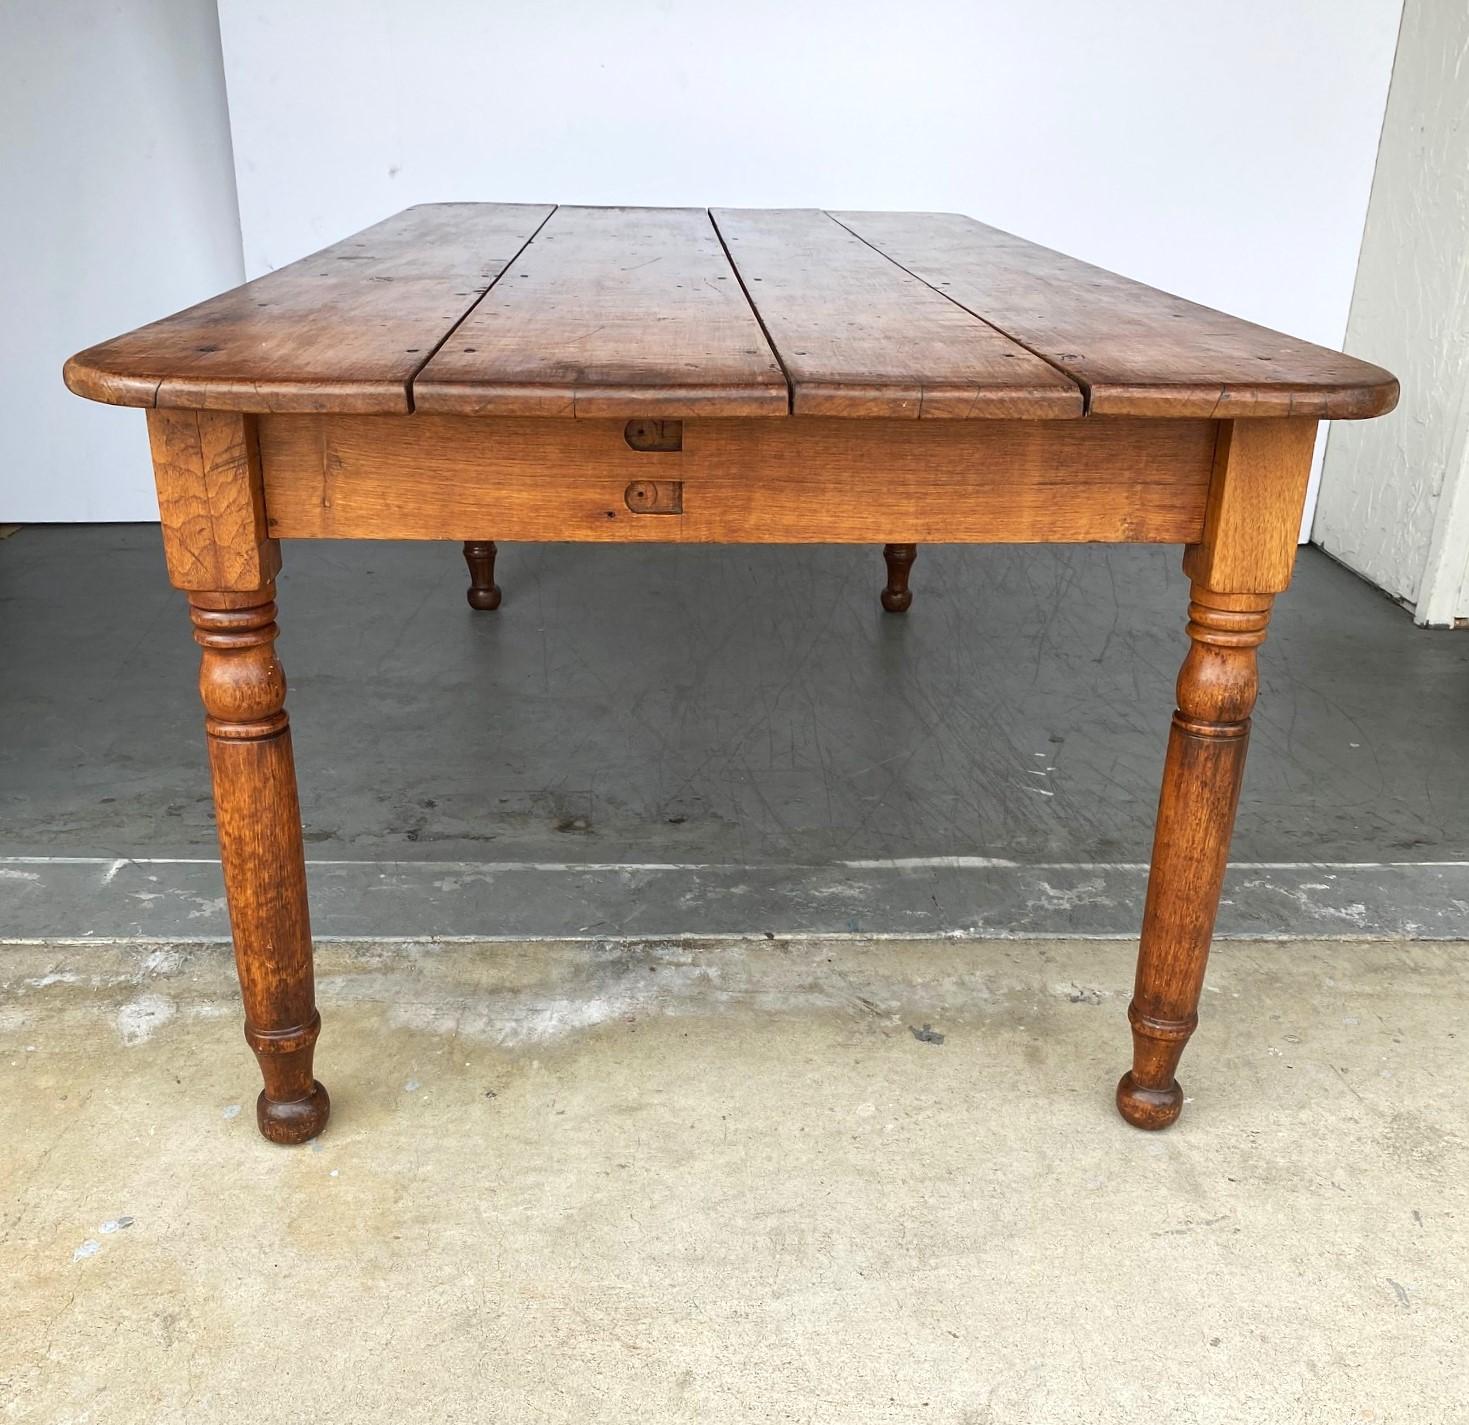 19th-century French farm table with a single drawer on one side.